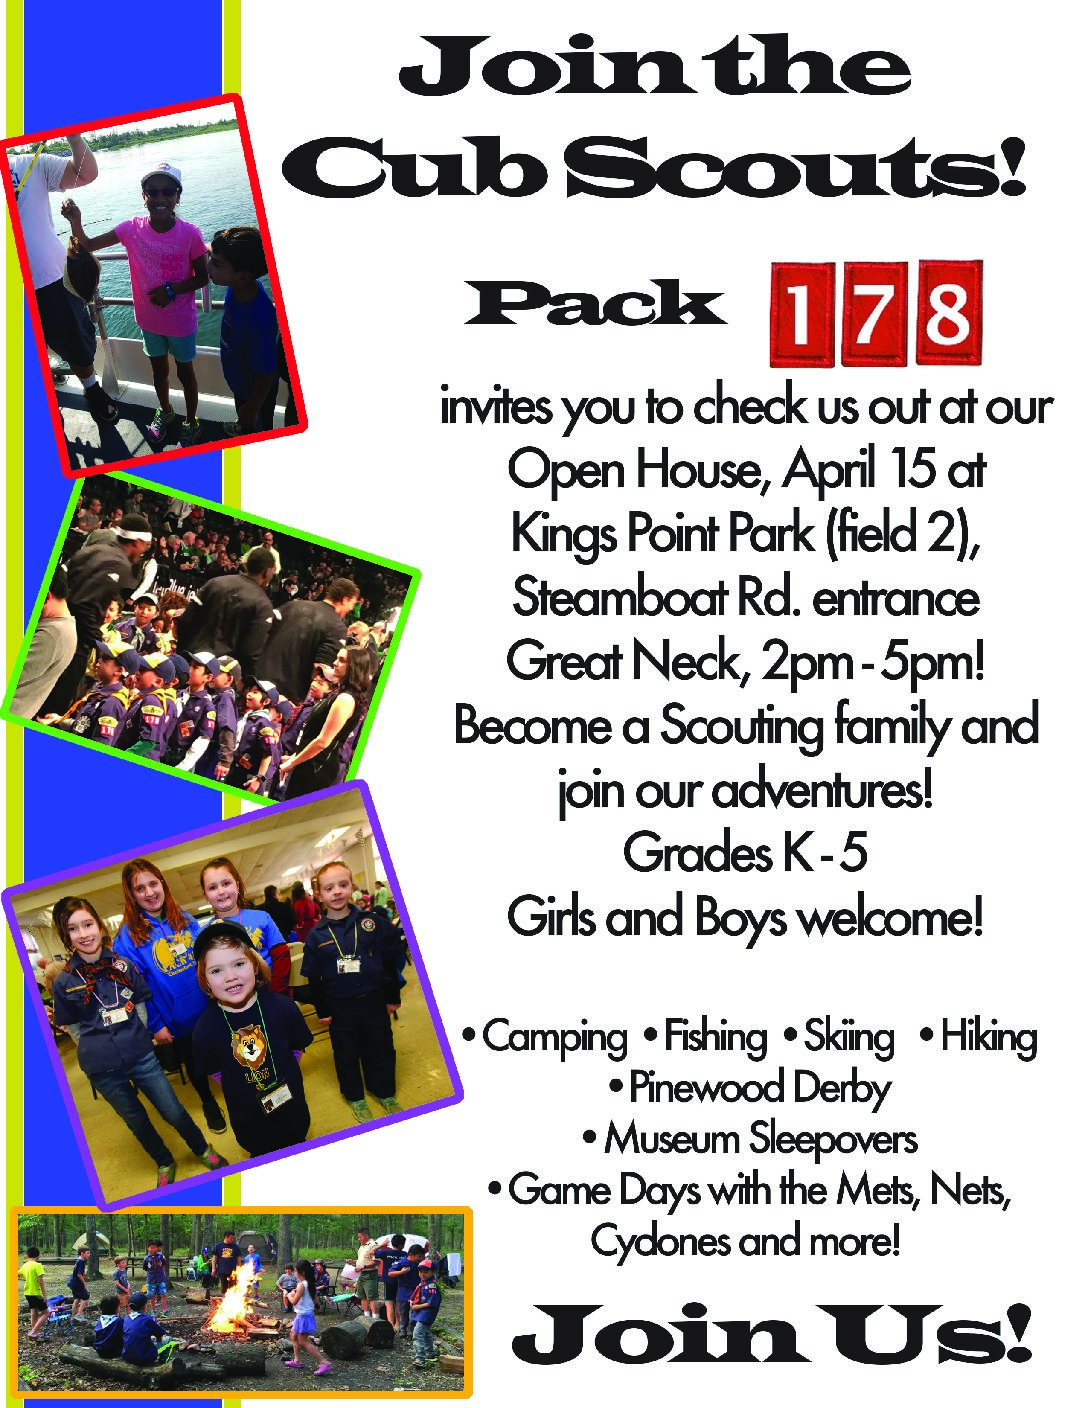 Great Neck Cub Scouts Pack 178 hosting open house